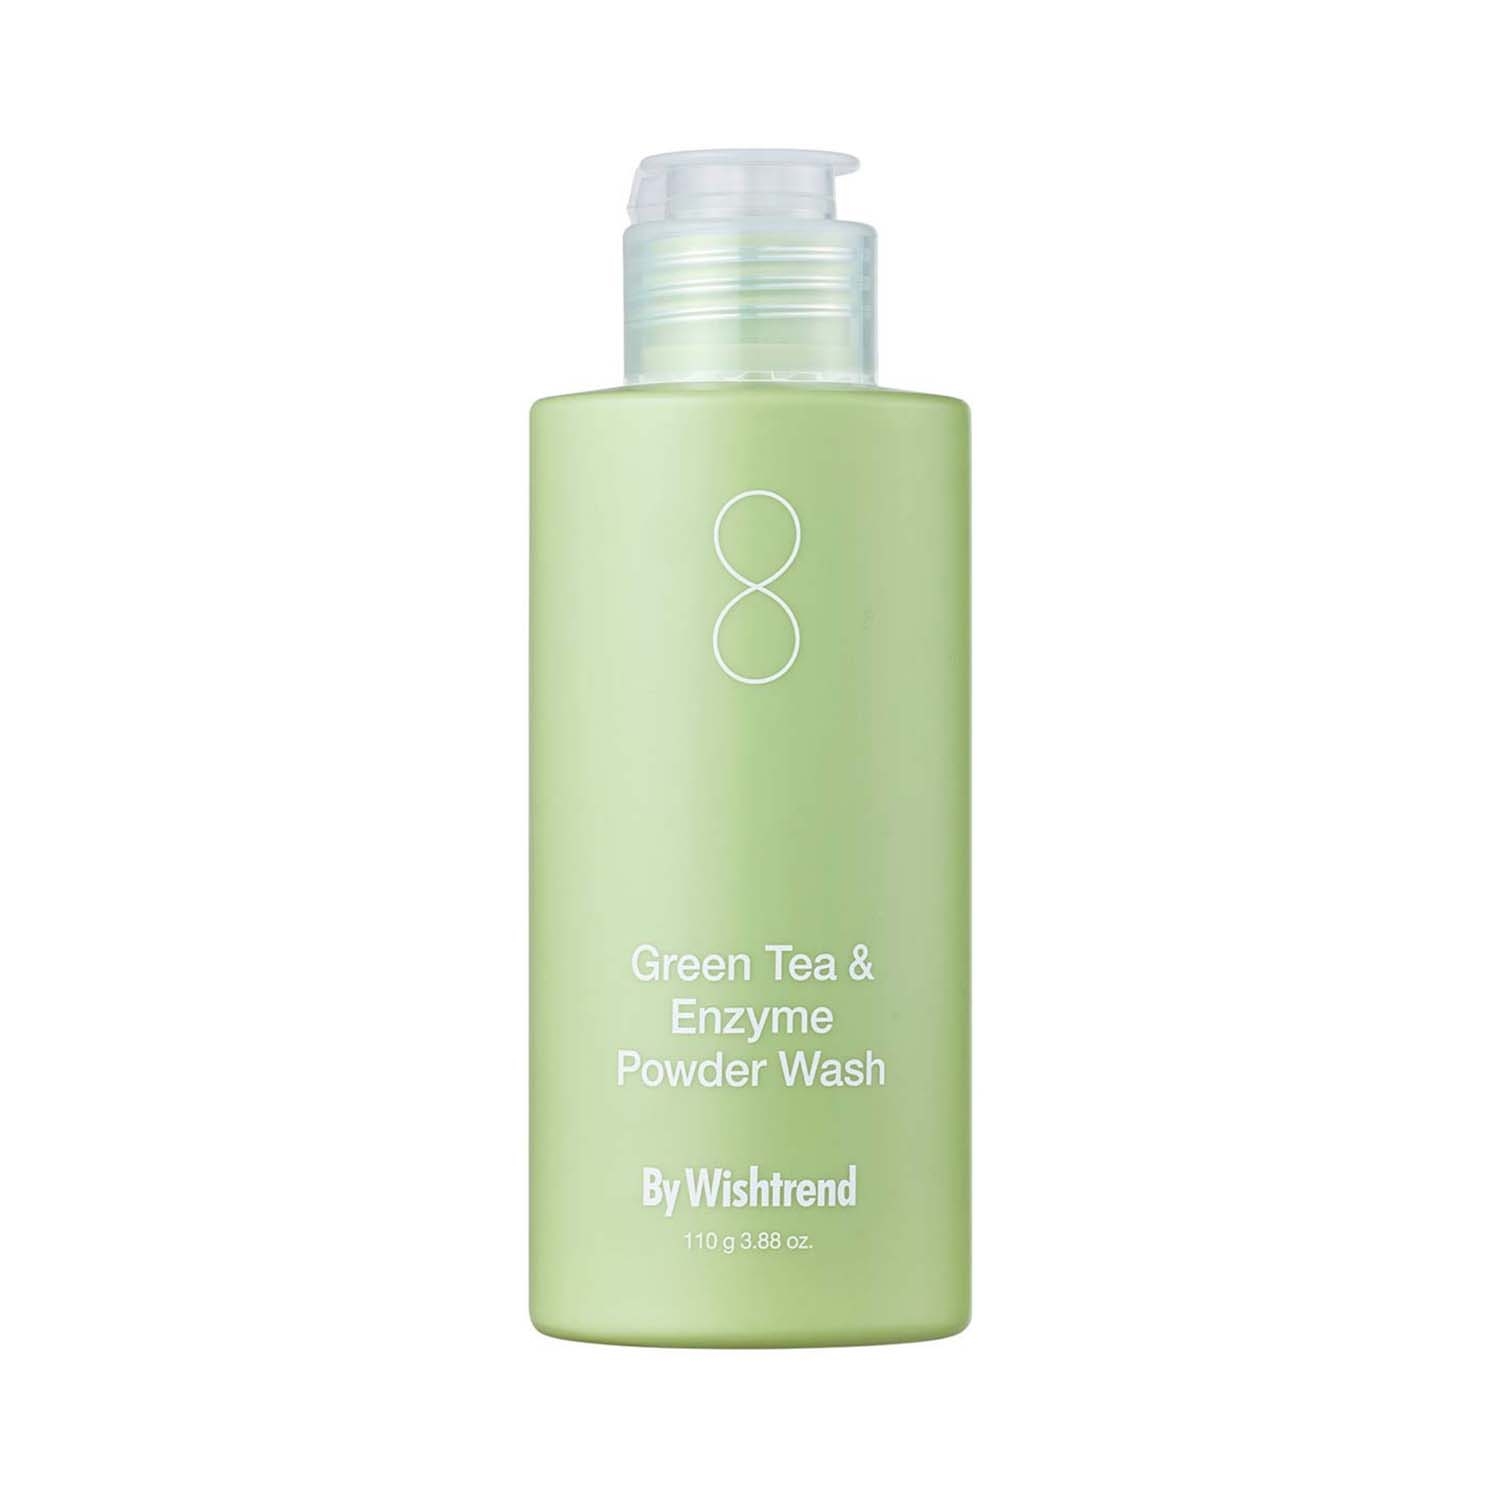 By Wishtrend | By Wishtrend Green Tea & Enzyme Powder Wash (110g)